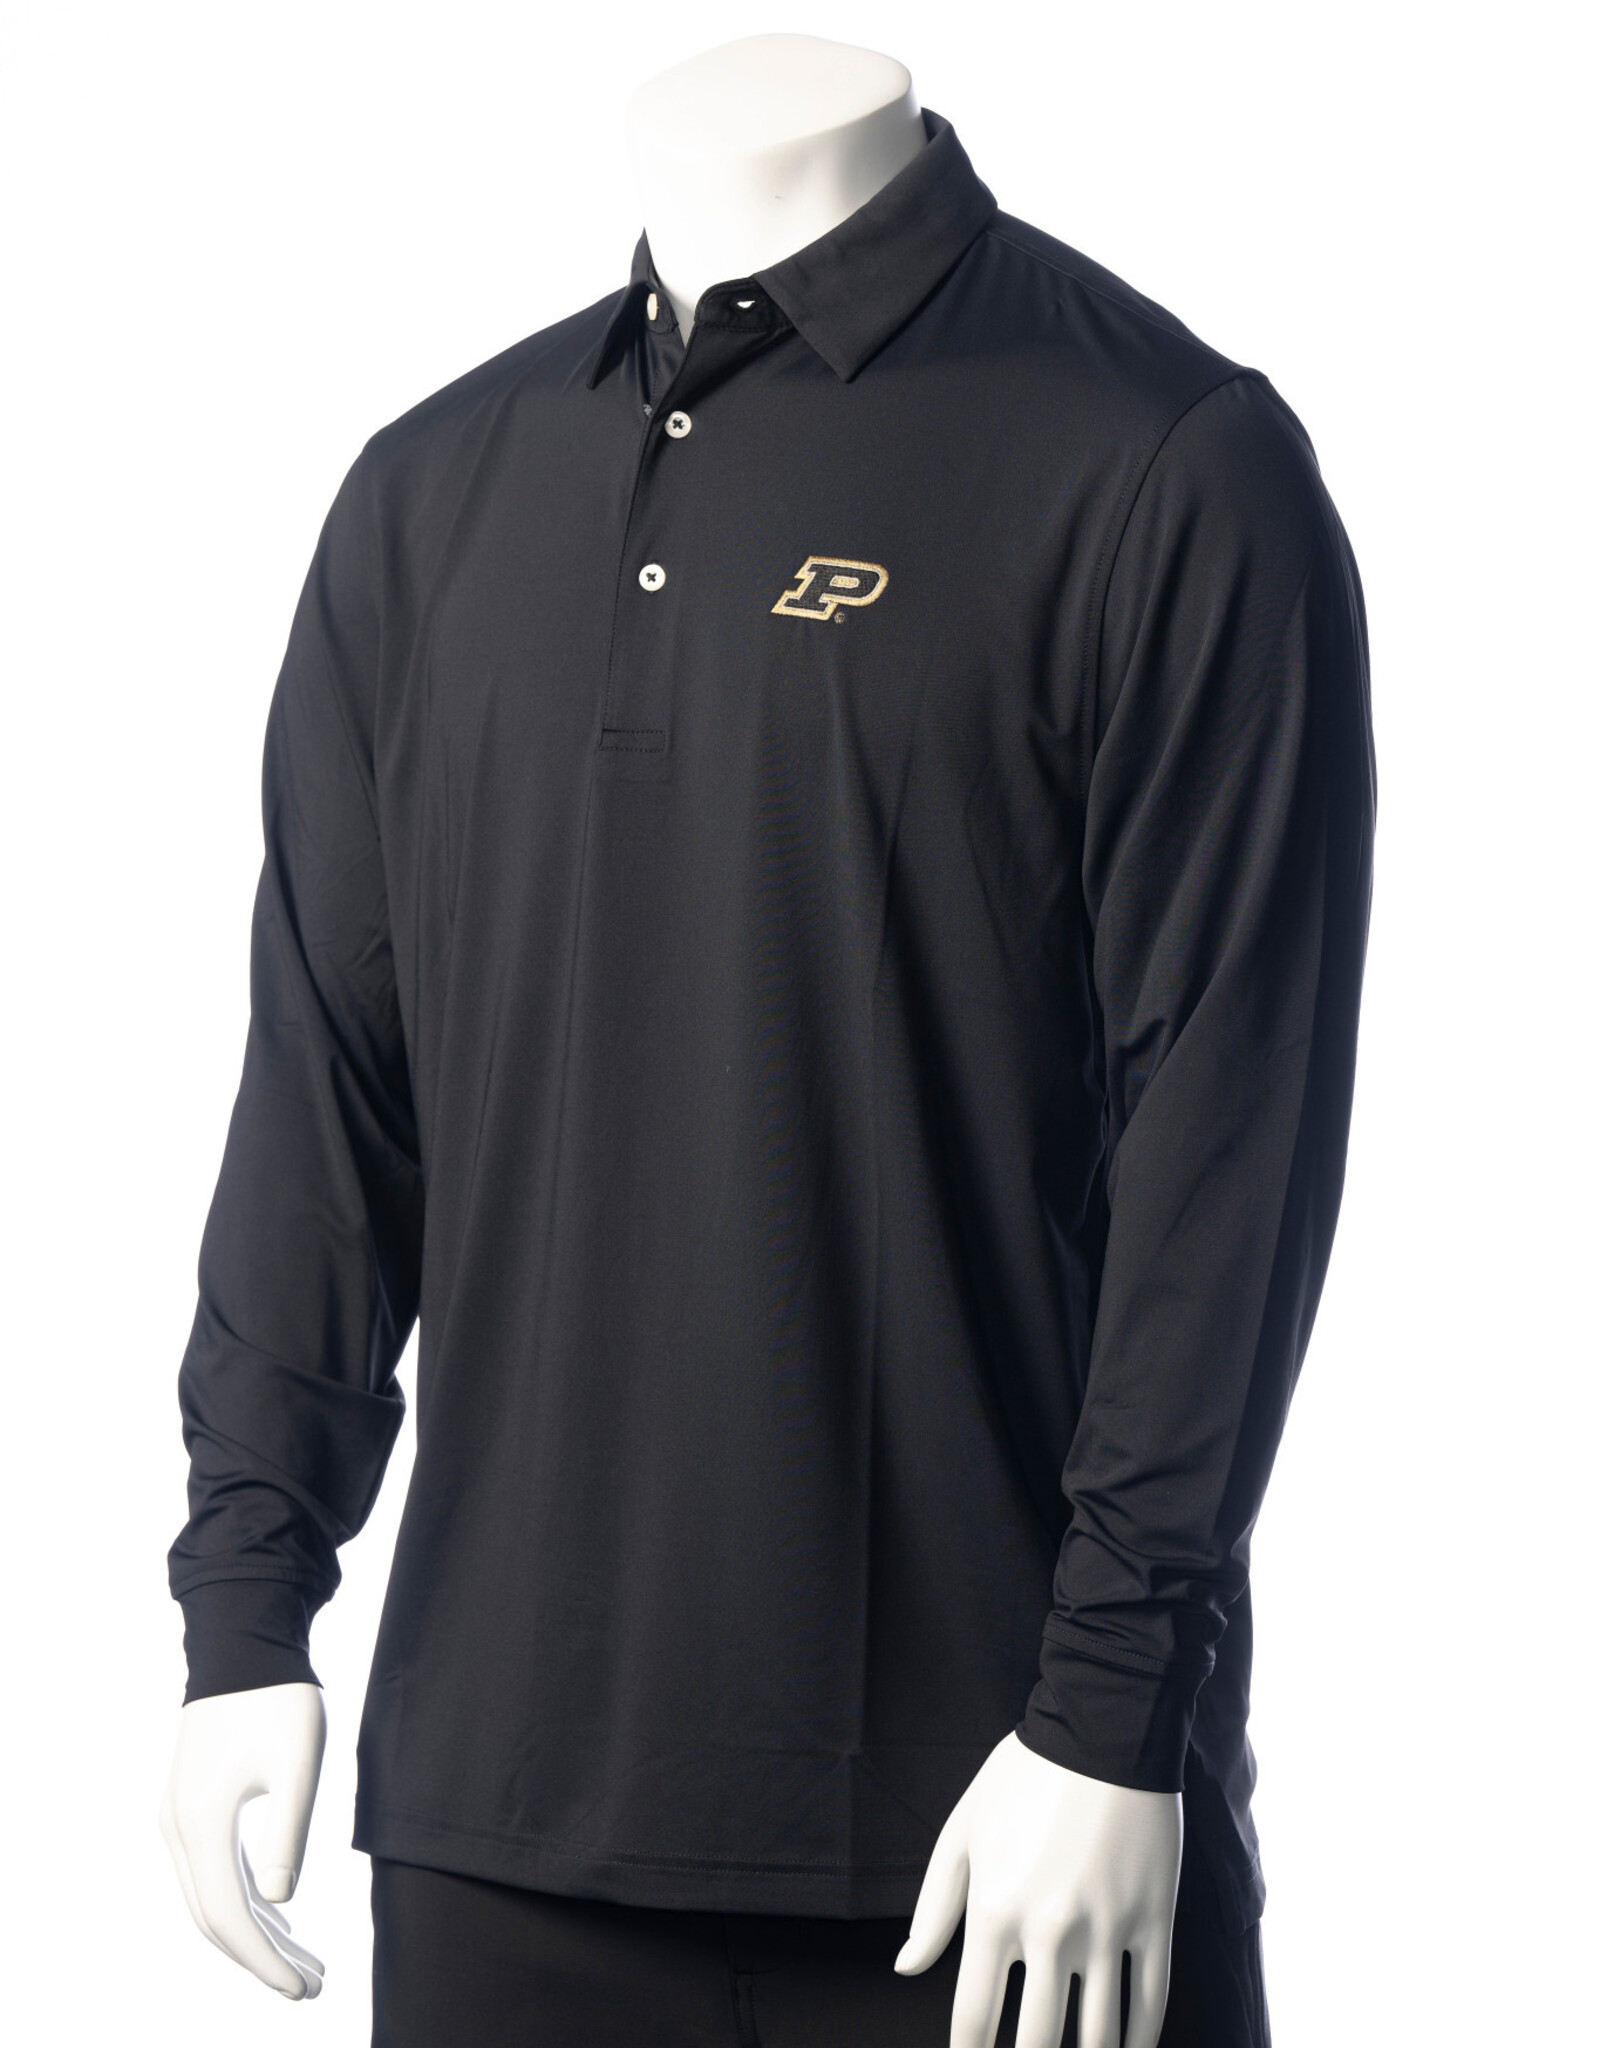 PURDUE COLLECTION PURDUE COLLECTION THE CLASSIC ECOTEC LONG SLEEVE POLO